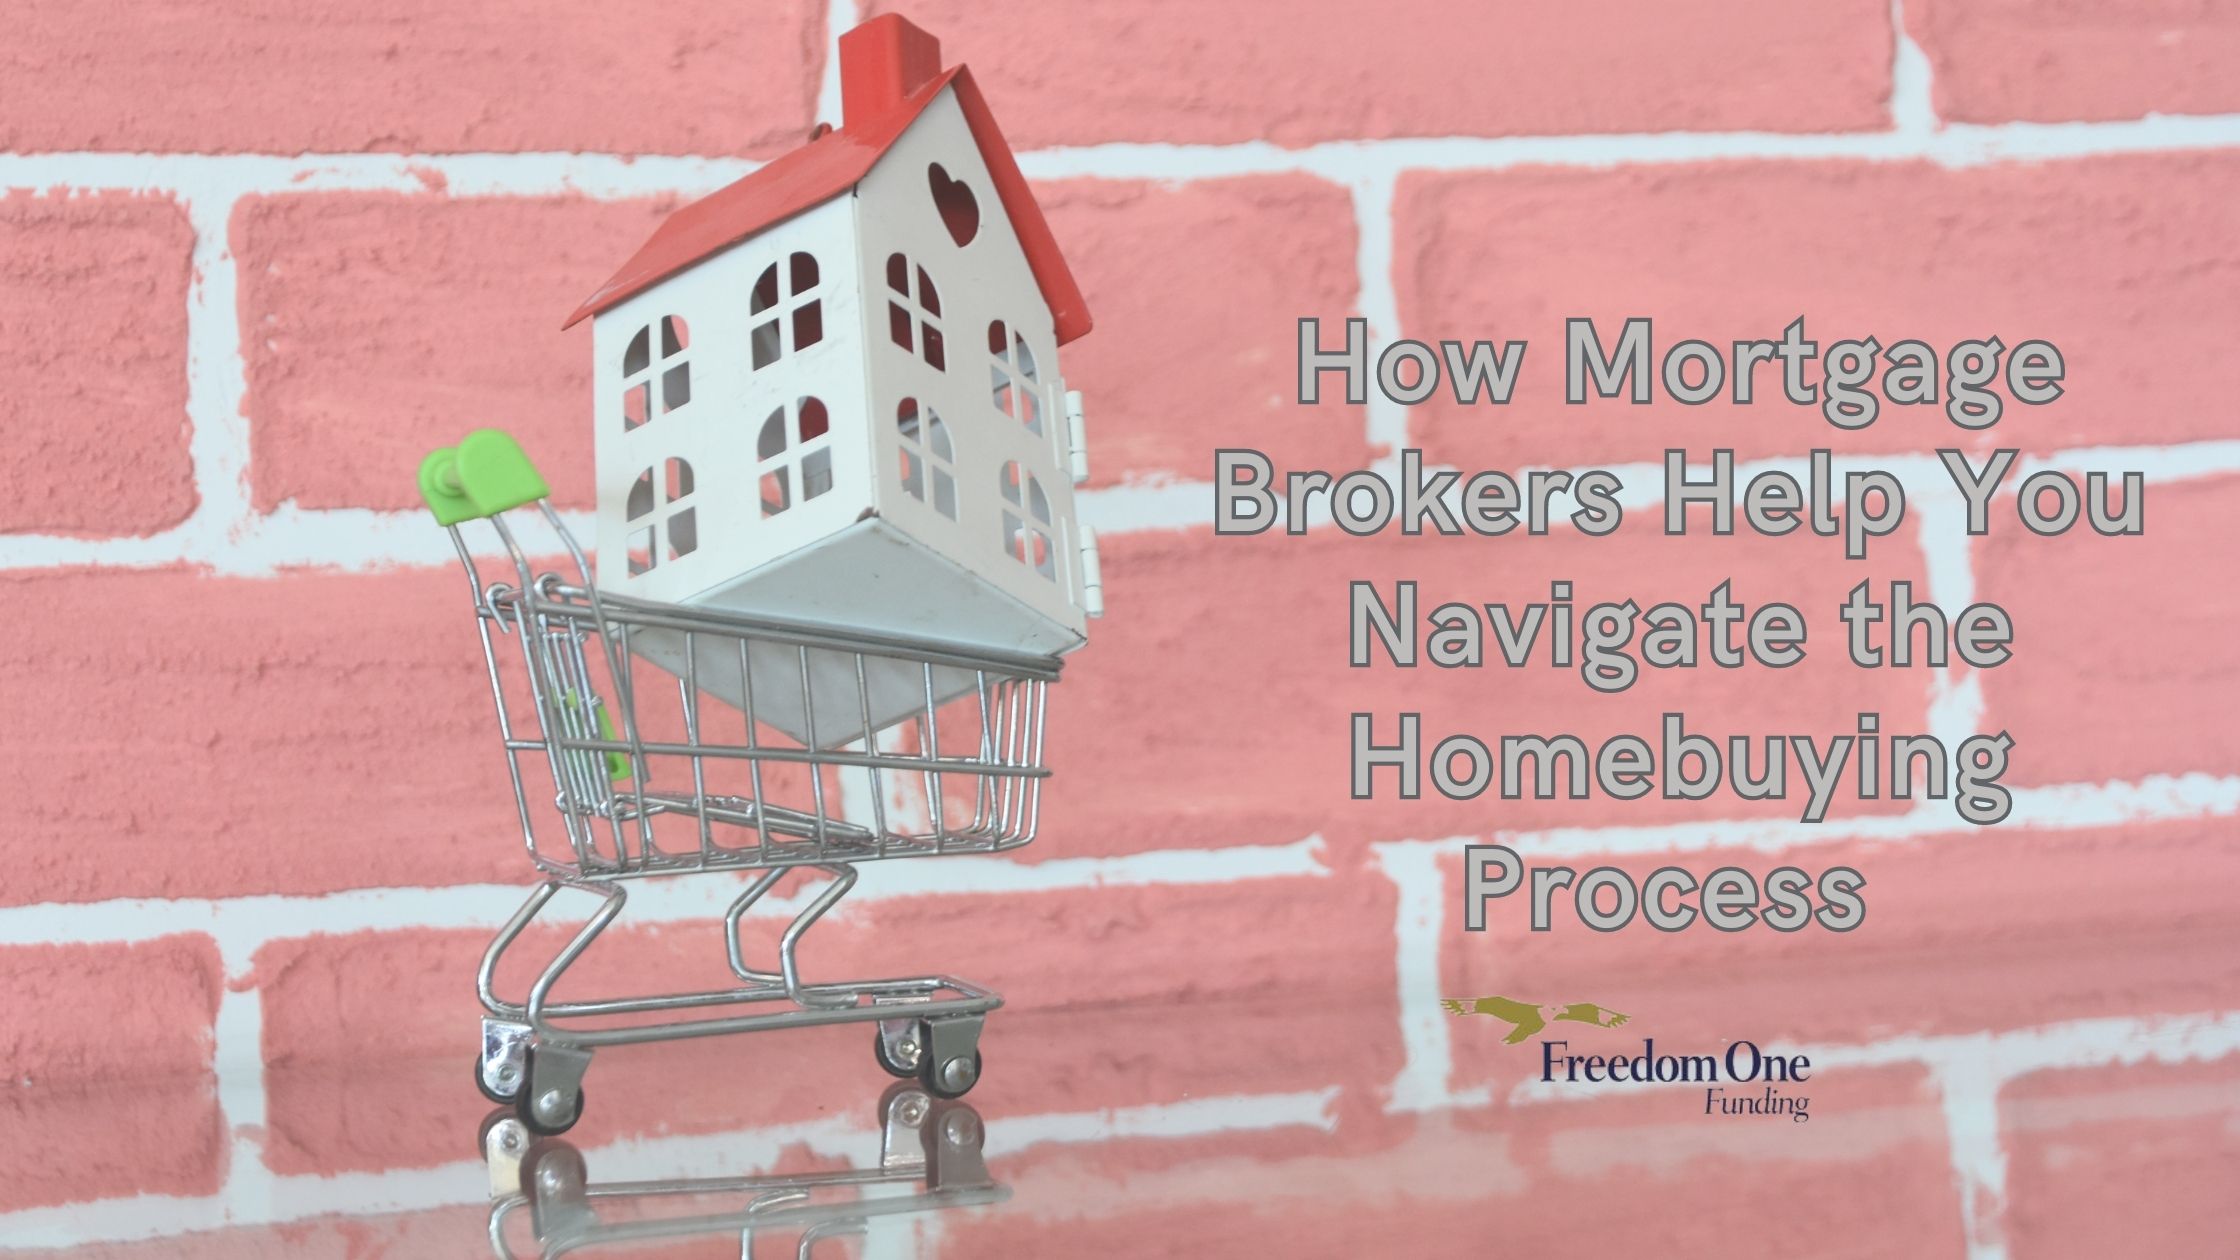 How Mortgage Brokers Help You Navigate the Homebuying Process